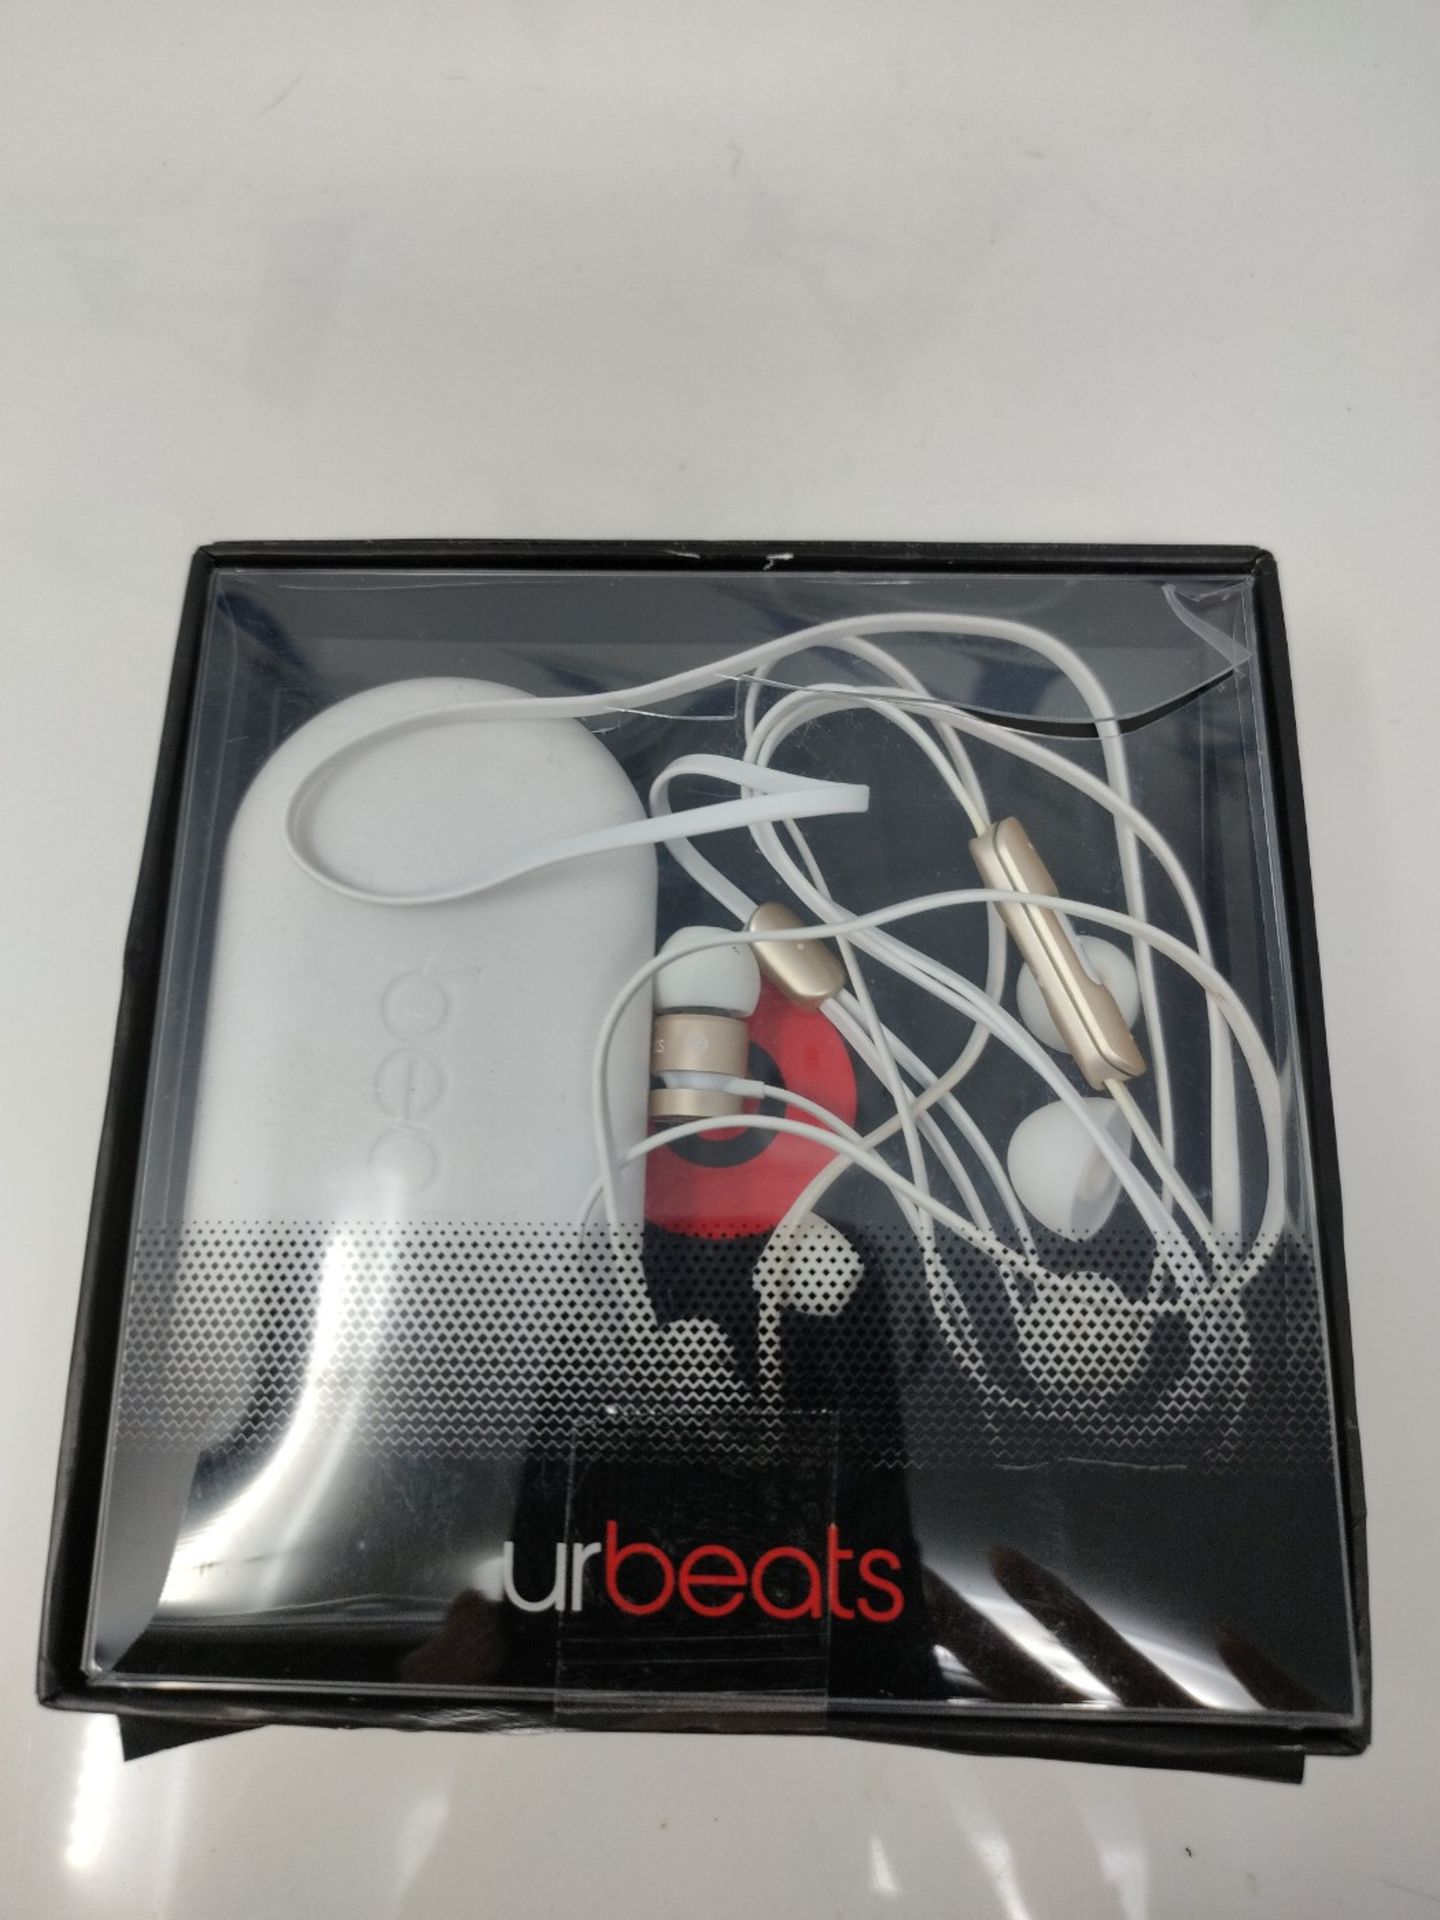 RRP £99.00 Beats by Dr. Dre UrBeats In-Ear Headphones - Gold - Image 2 of 3